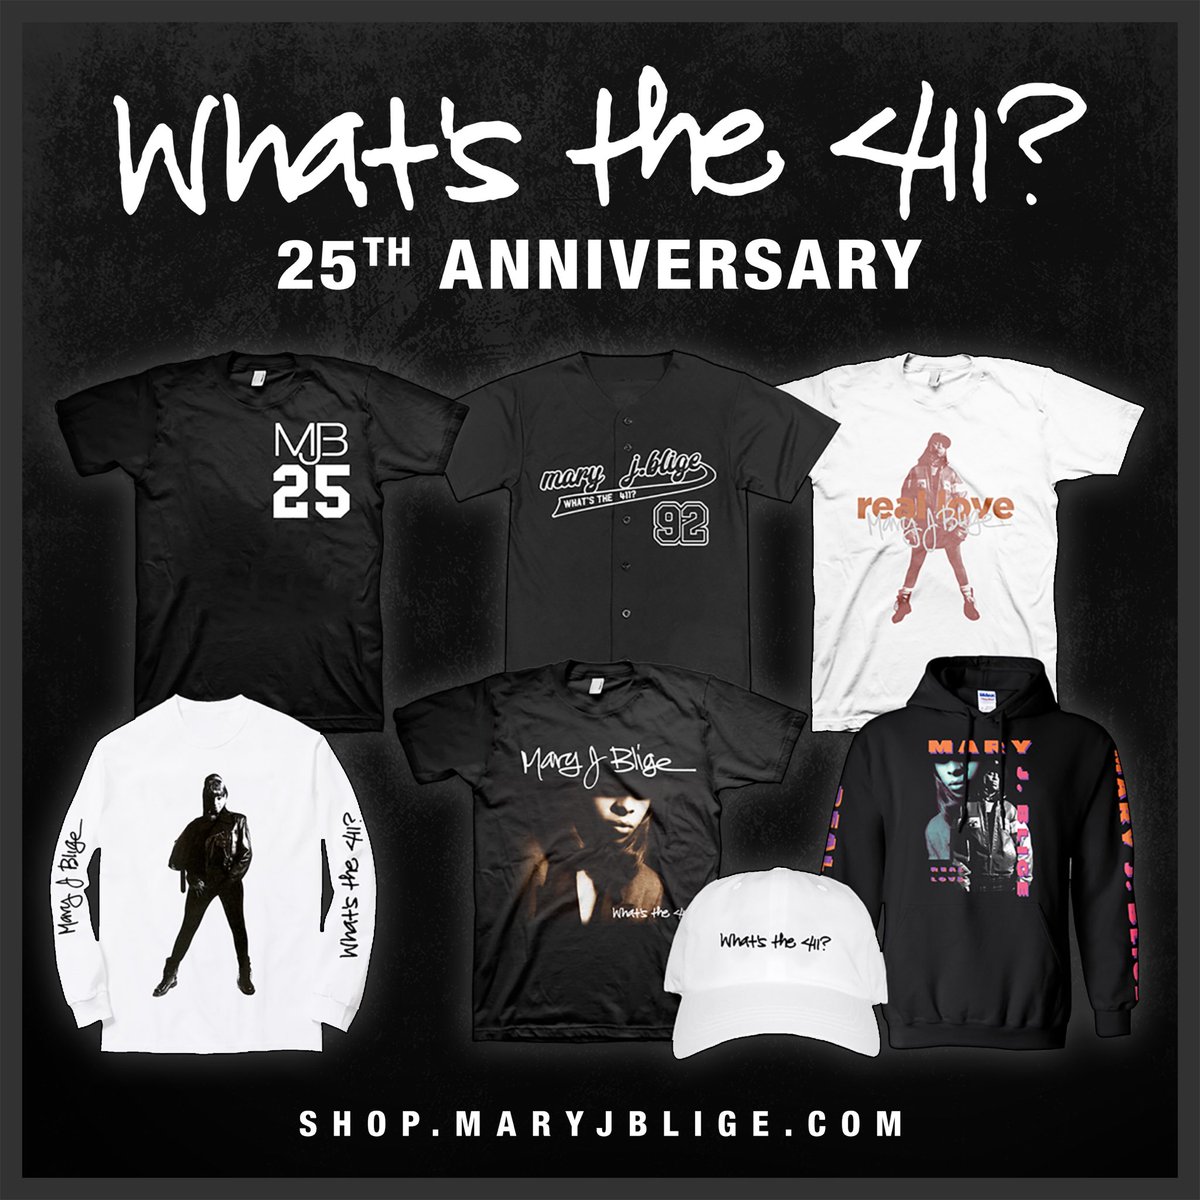 It's a celebration!! Get your #WhatsThe411 limited edition merchandise at https://t.co/ed1MYOmLEJ #MJB25 https://t.co/BuvfgN4tn3